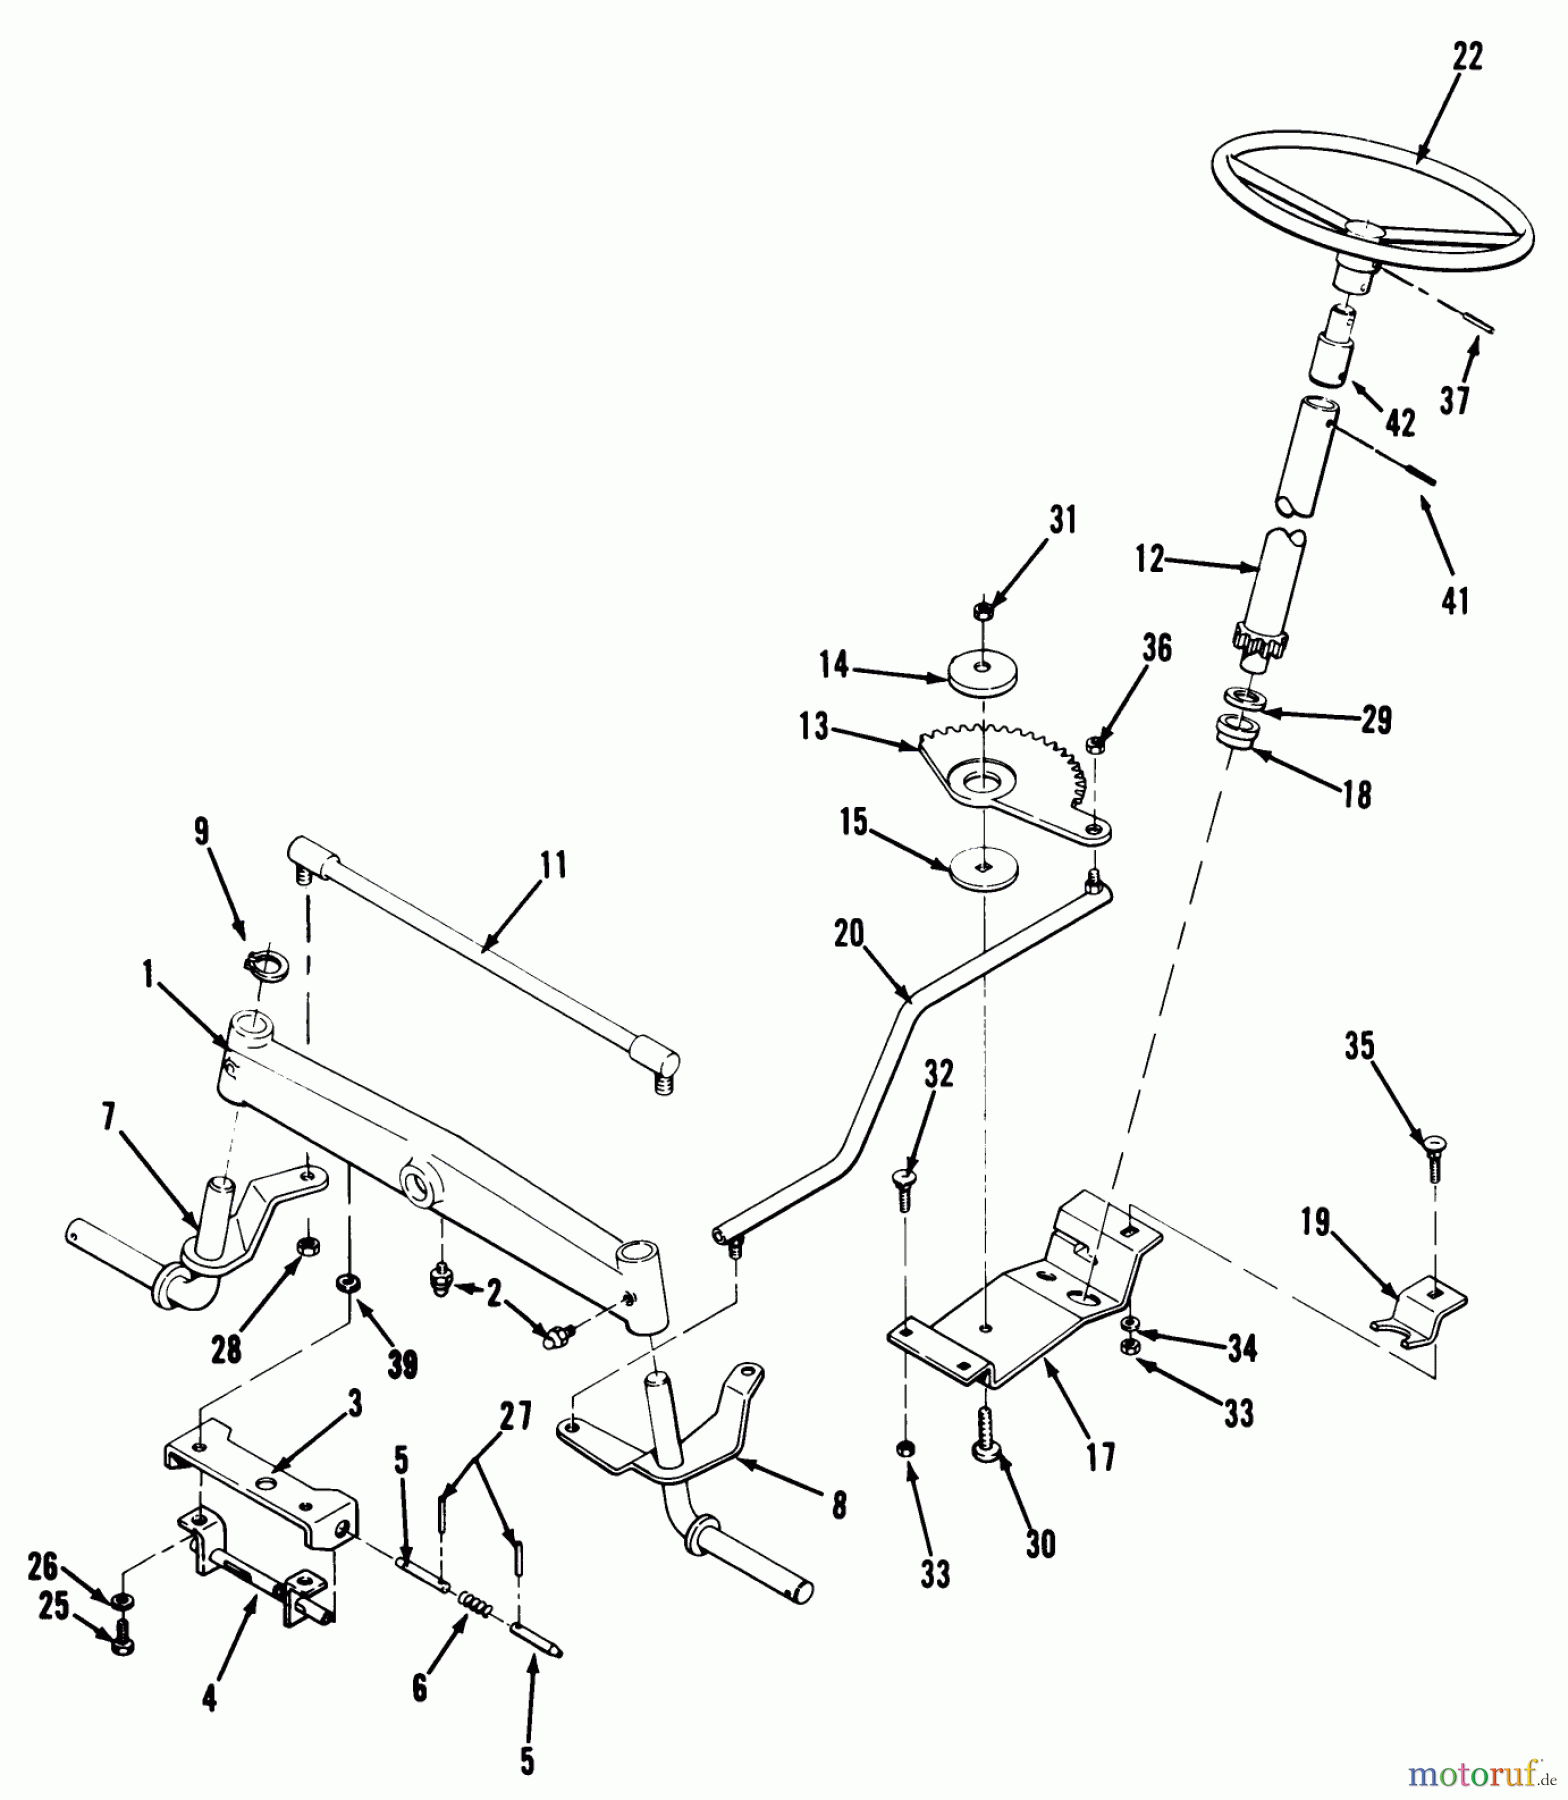  Toro Neu Mowers, Lawn & Garden Tractor Seite 2 A2-12KE02 (212-H) - Toro 212-H Tractor, 1991 (1000001-1999999) FRONT AXLE & STEERING ASSEMBLY